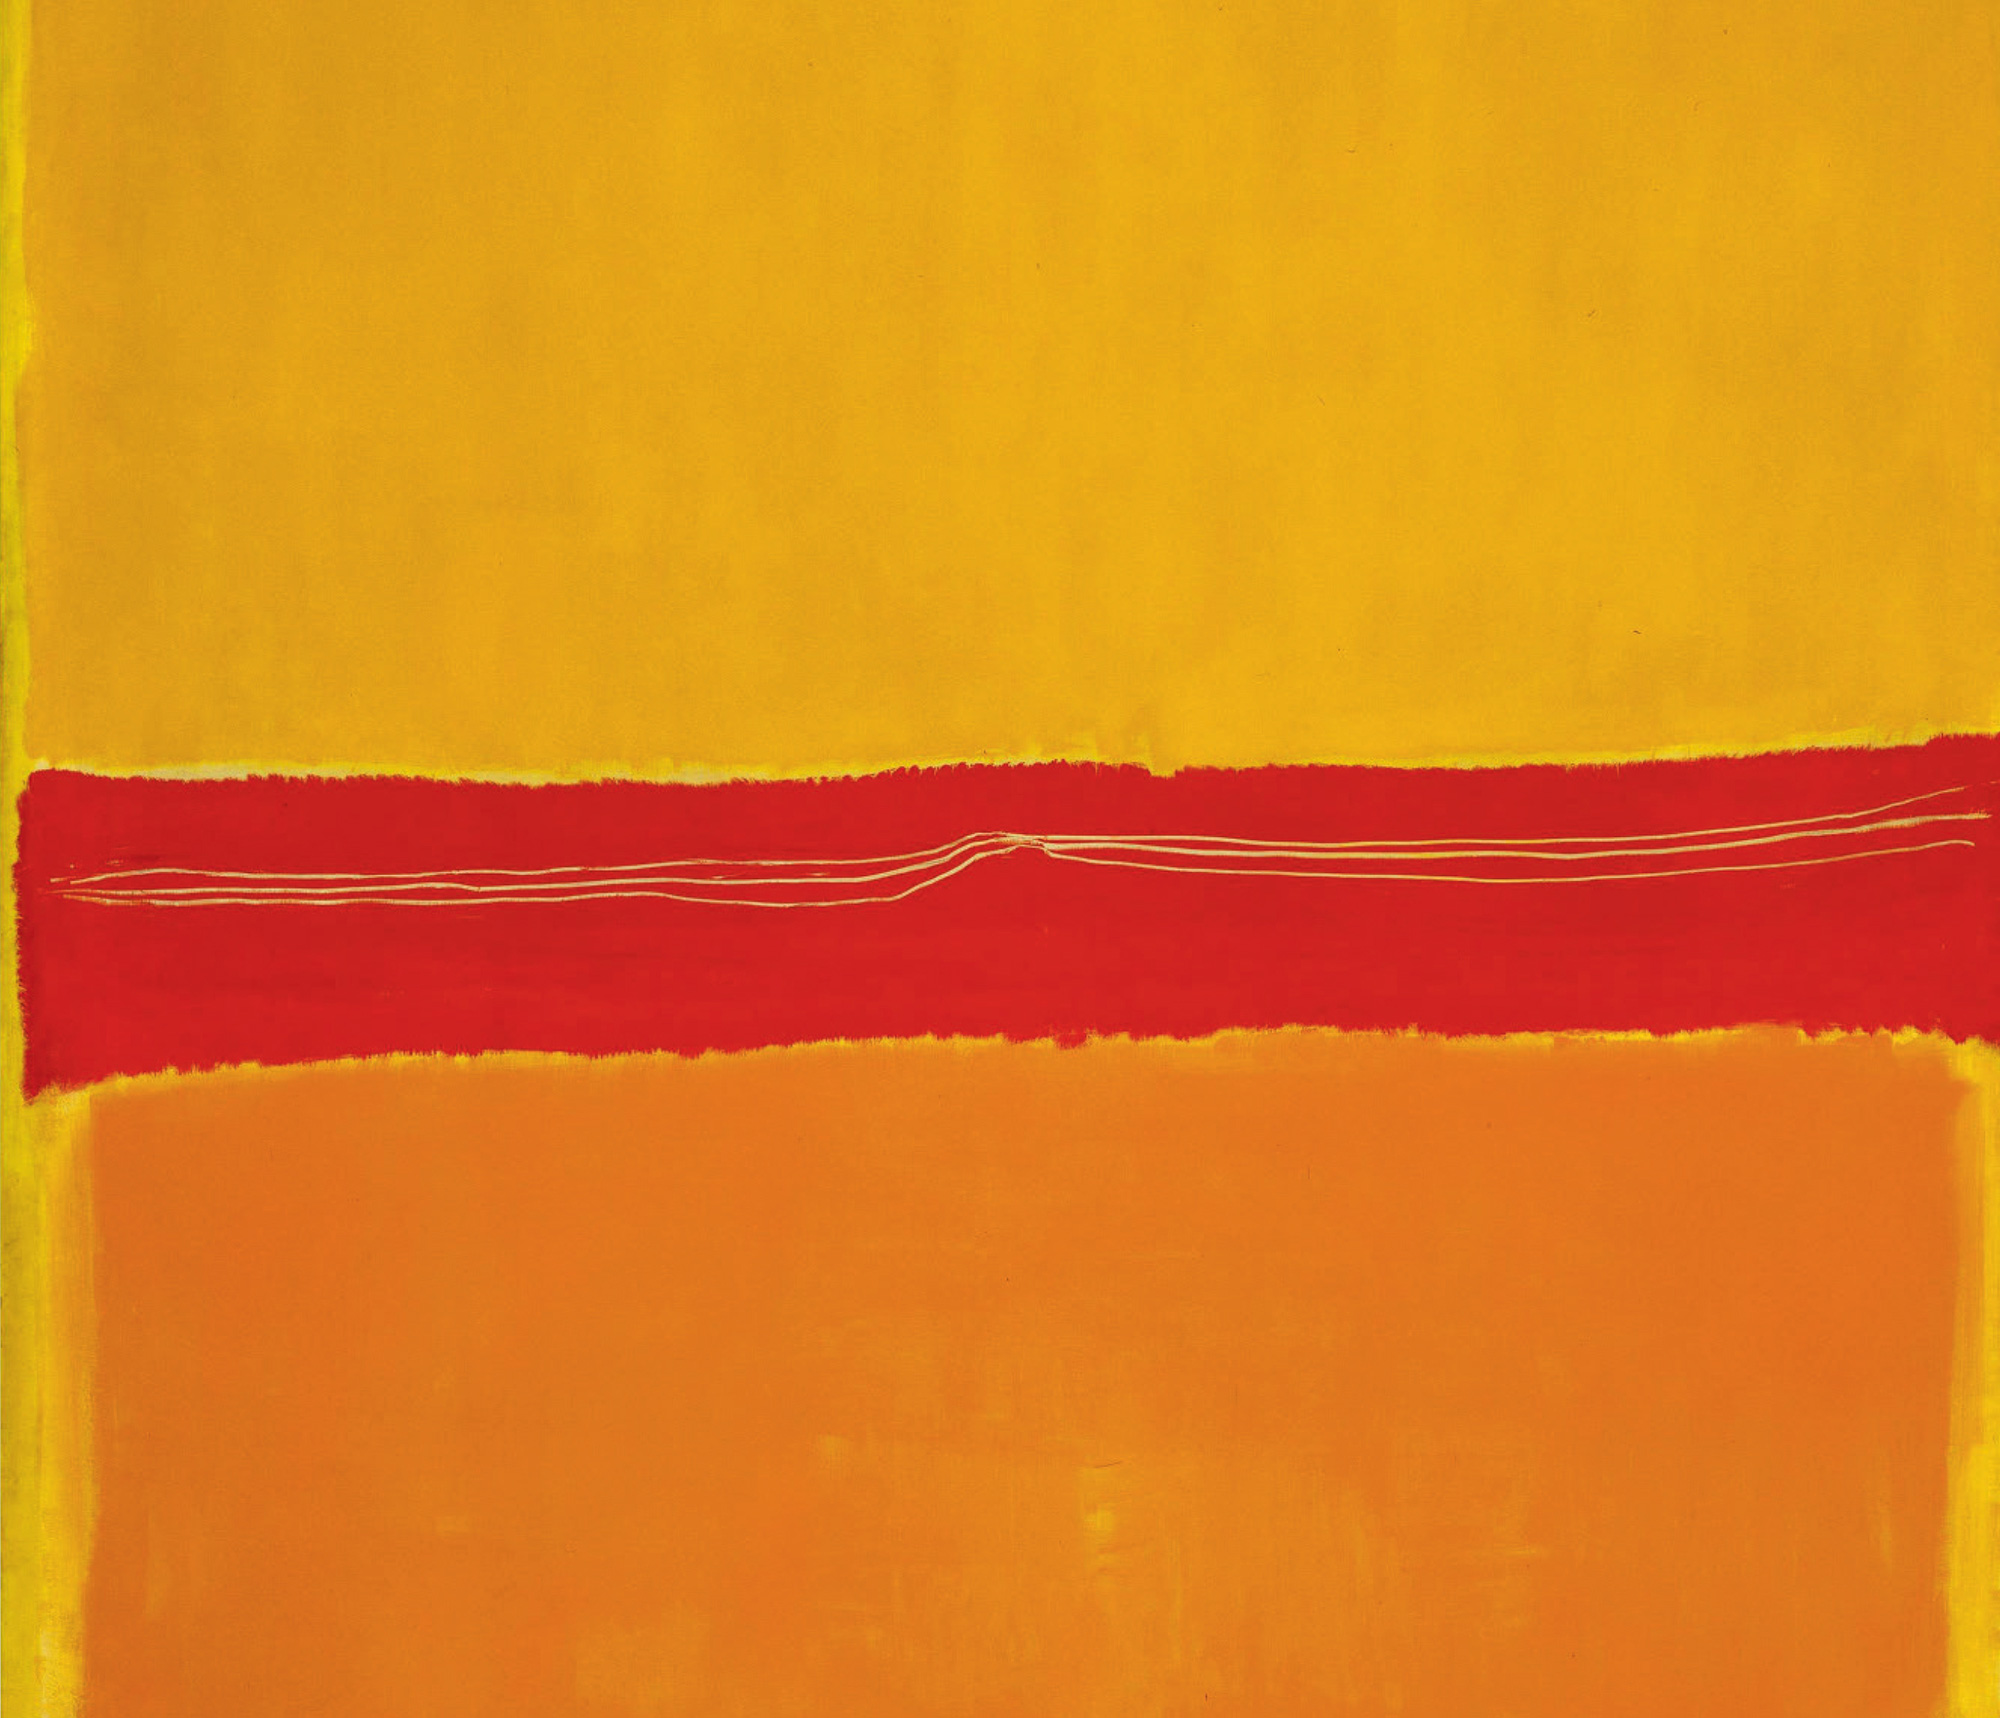 A detail of a red stripe through a yellow background from Mark Rothko’s nineteen fifty painting titled “No. 5/No. 22.”